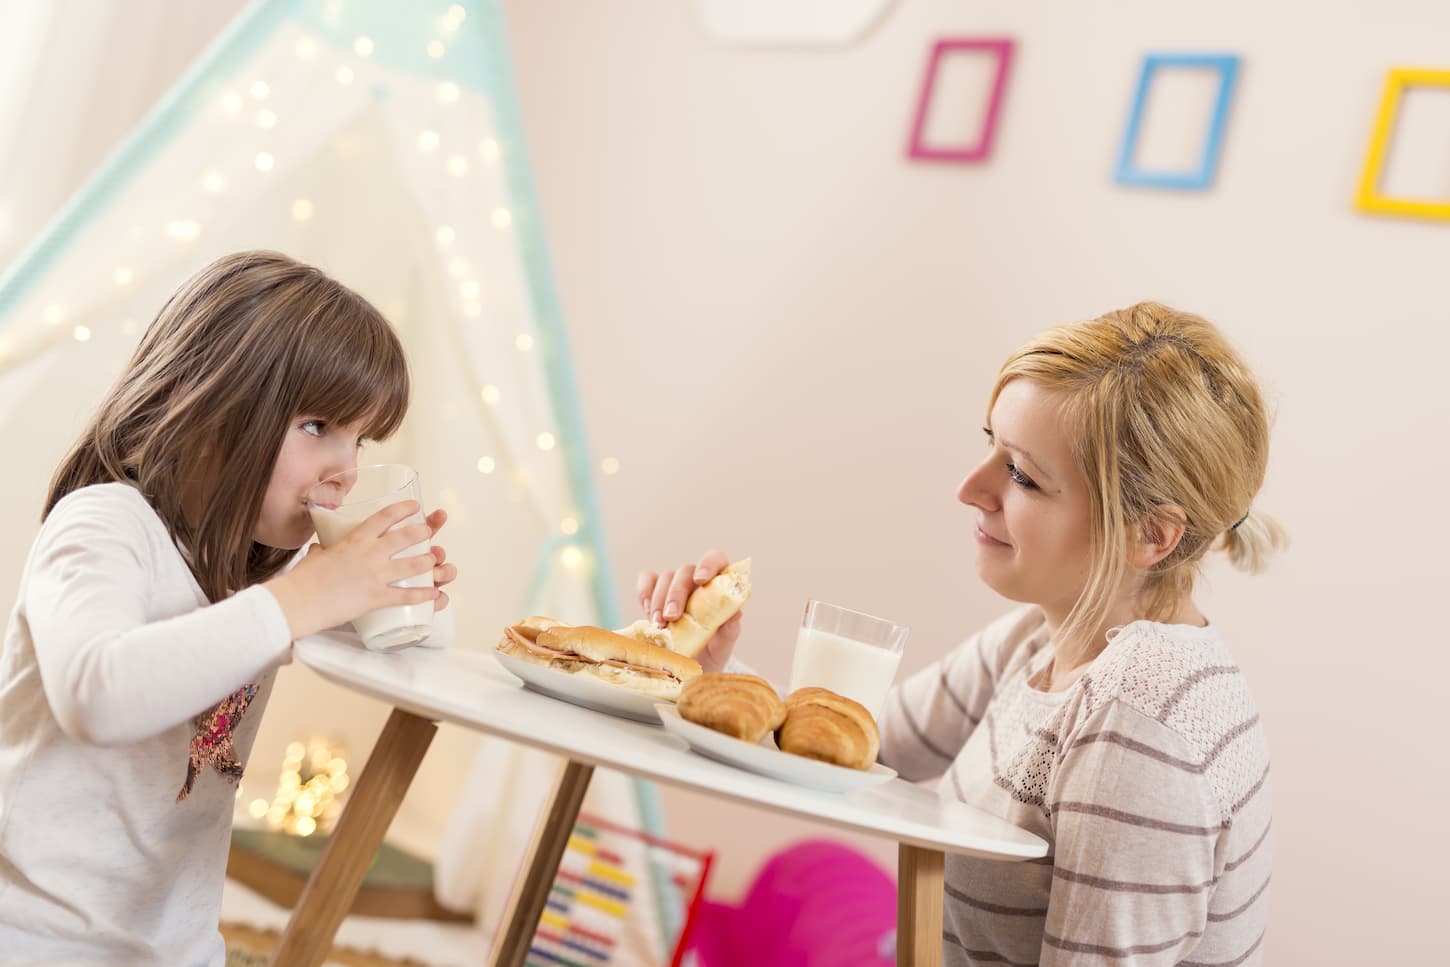 An image of a mother and daughter having breakfast together to start the day.